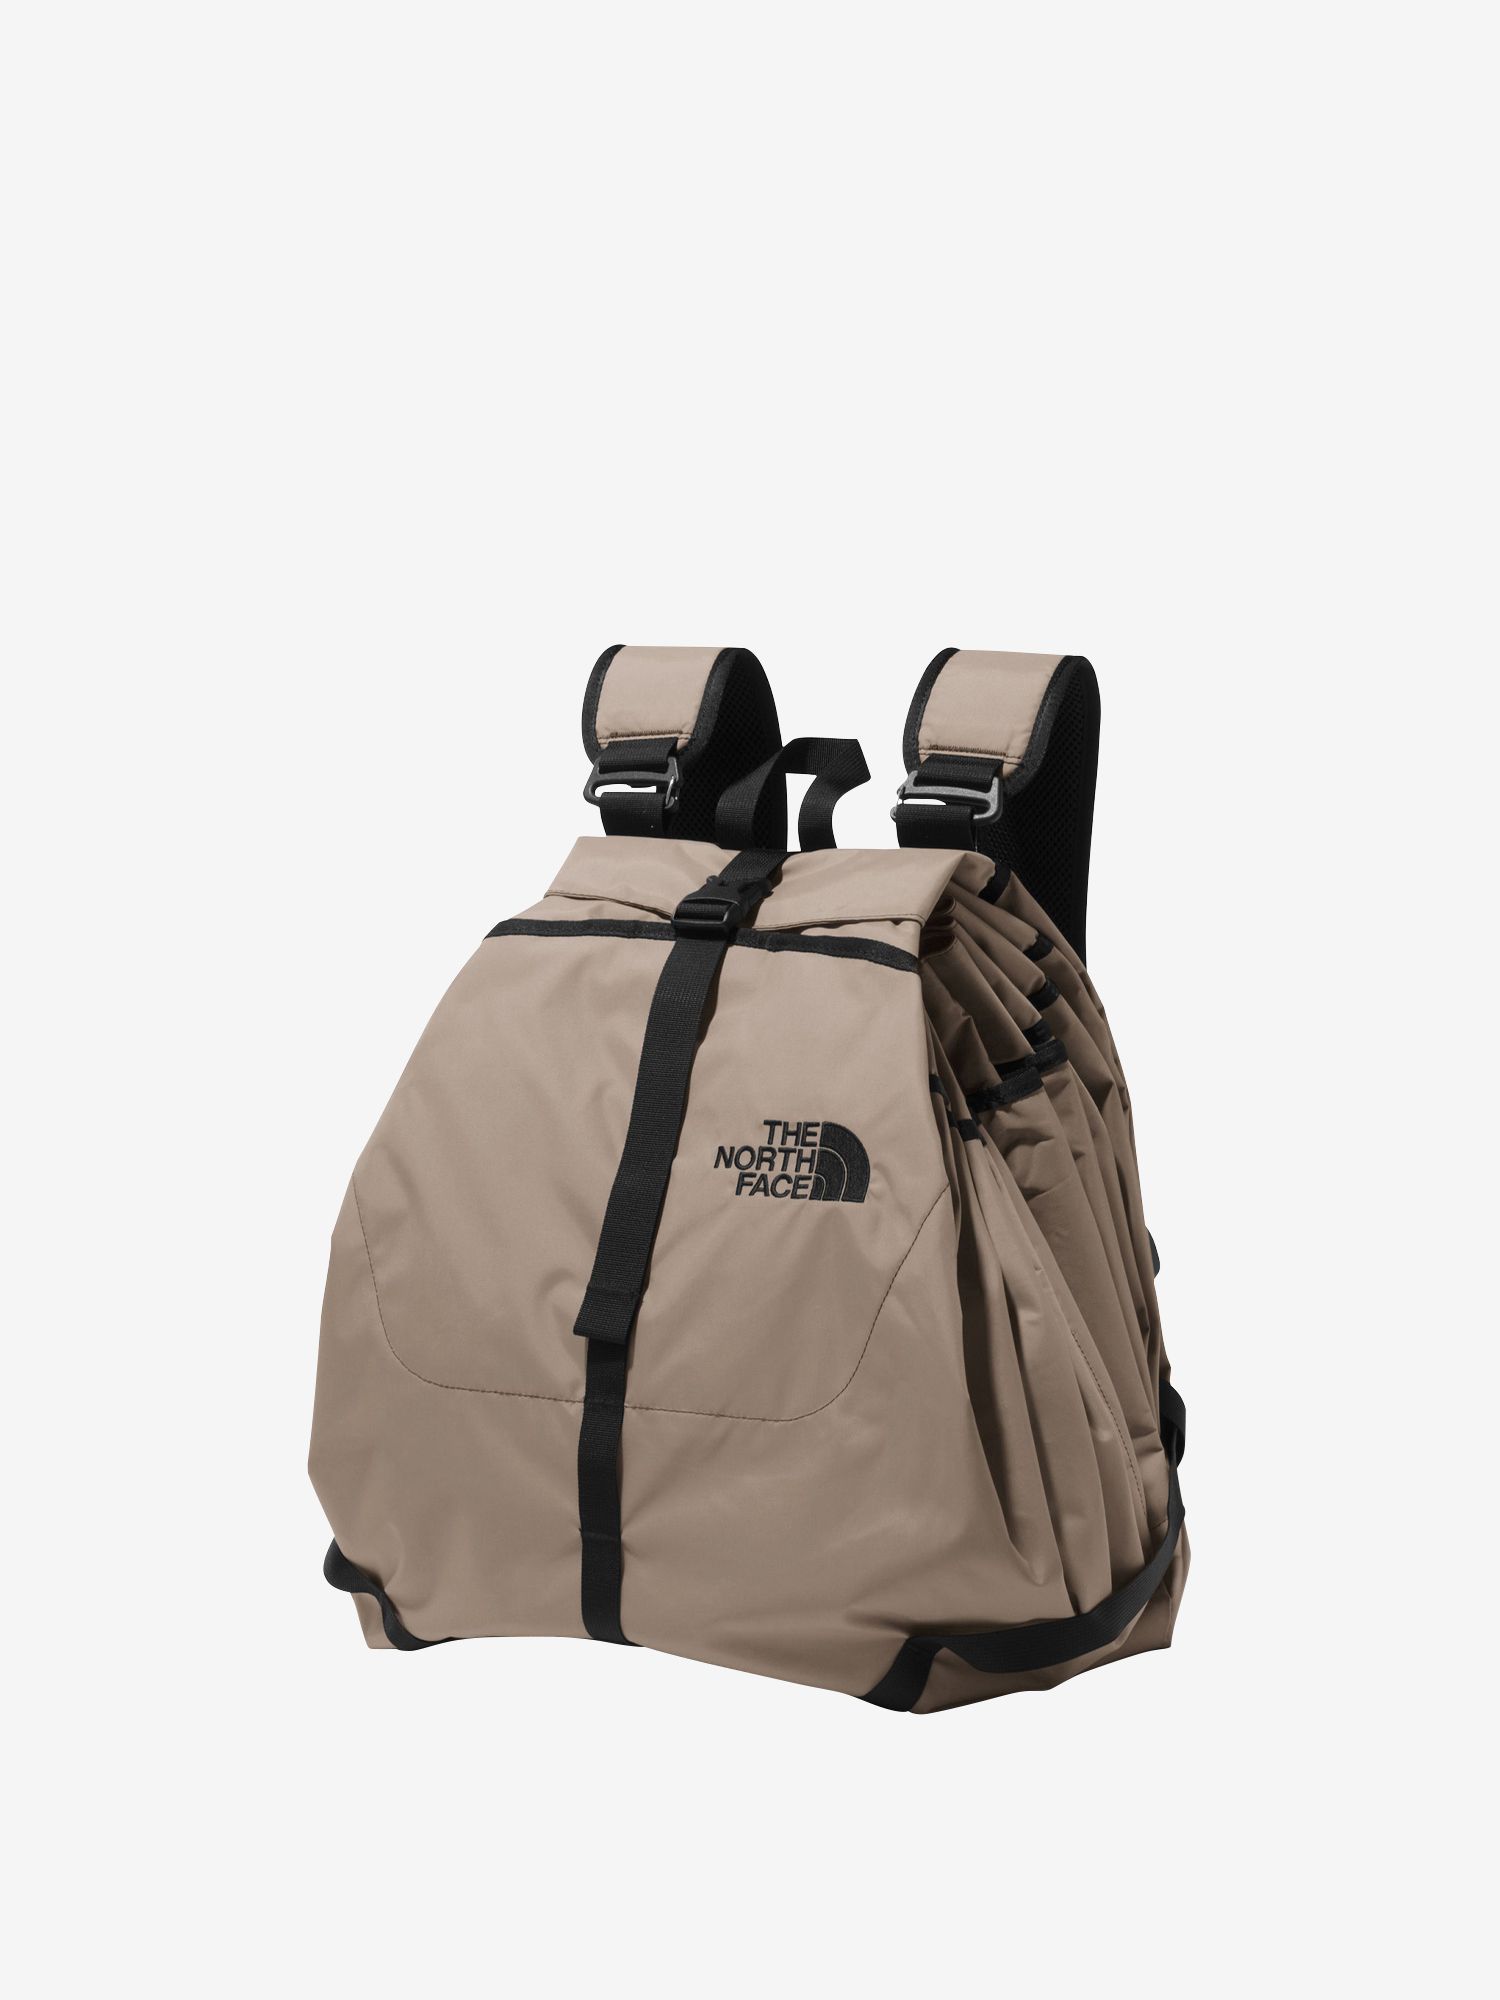 THE NORTH FACE エスケープ バックパック